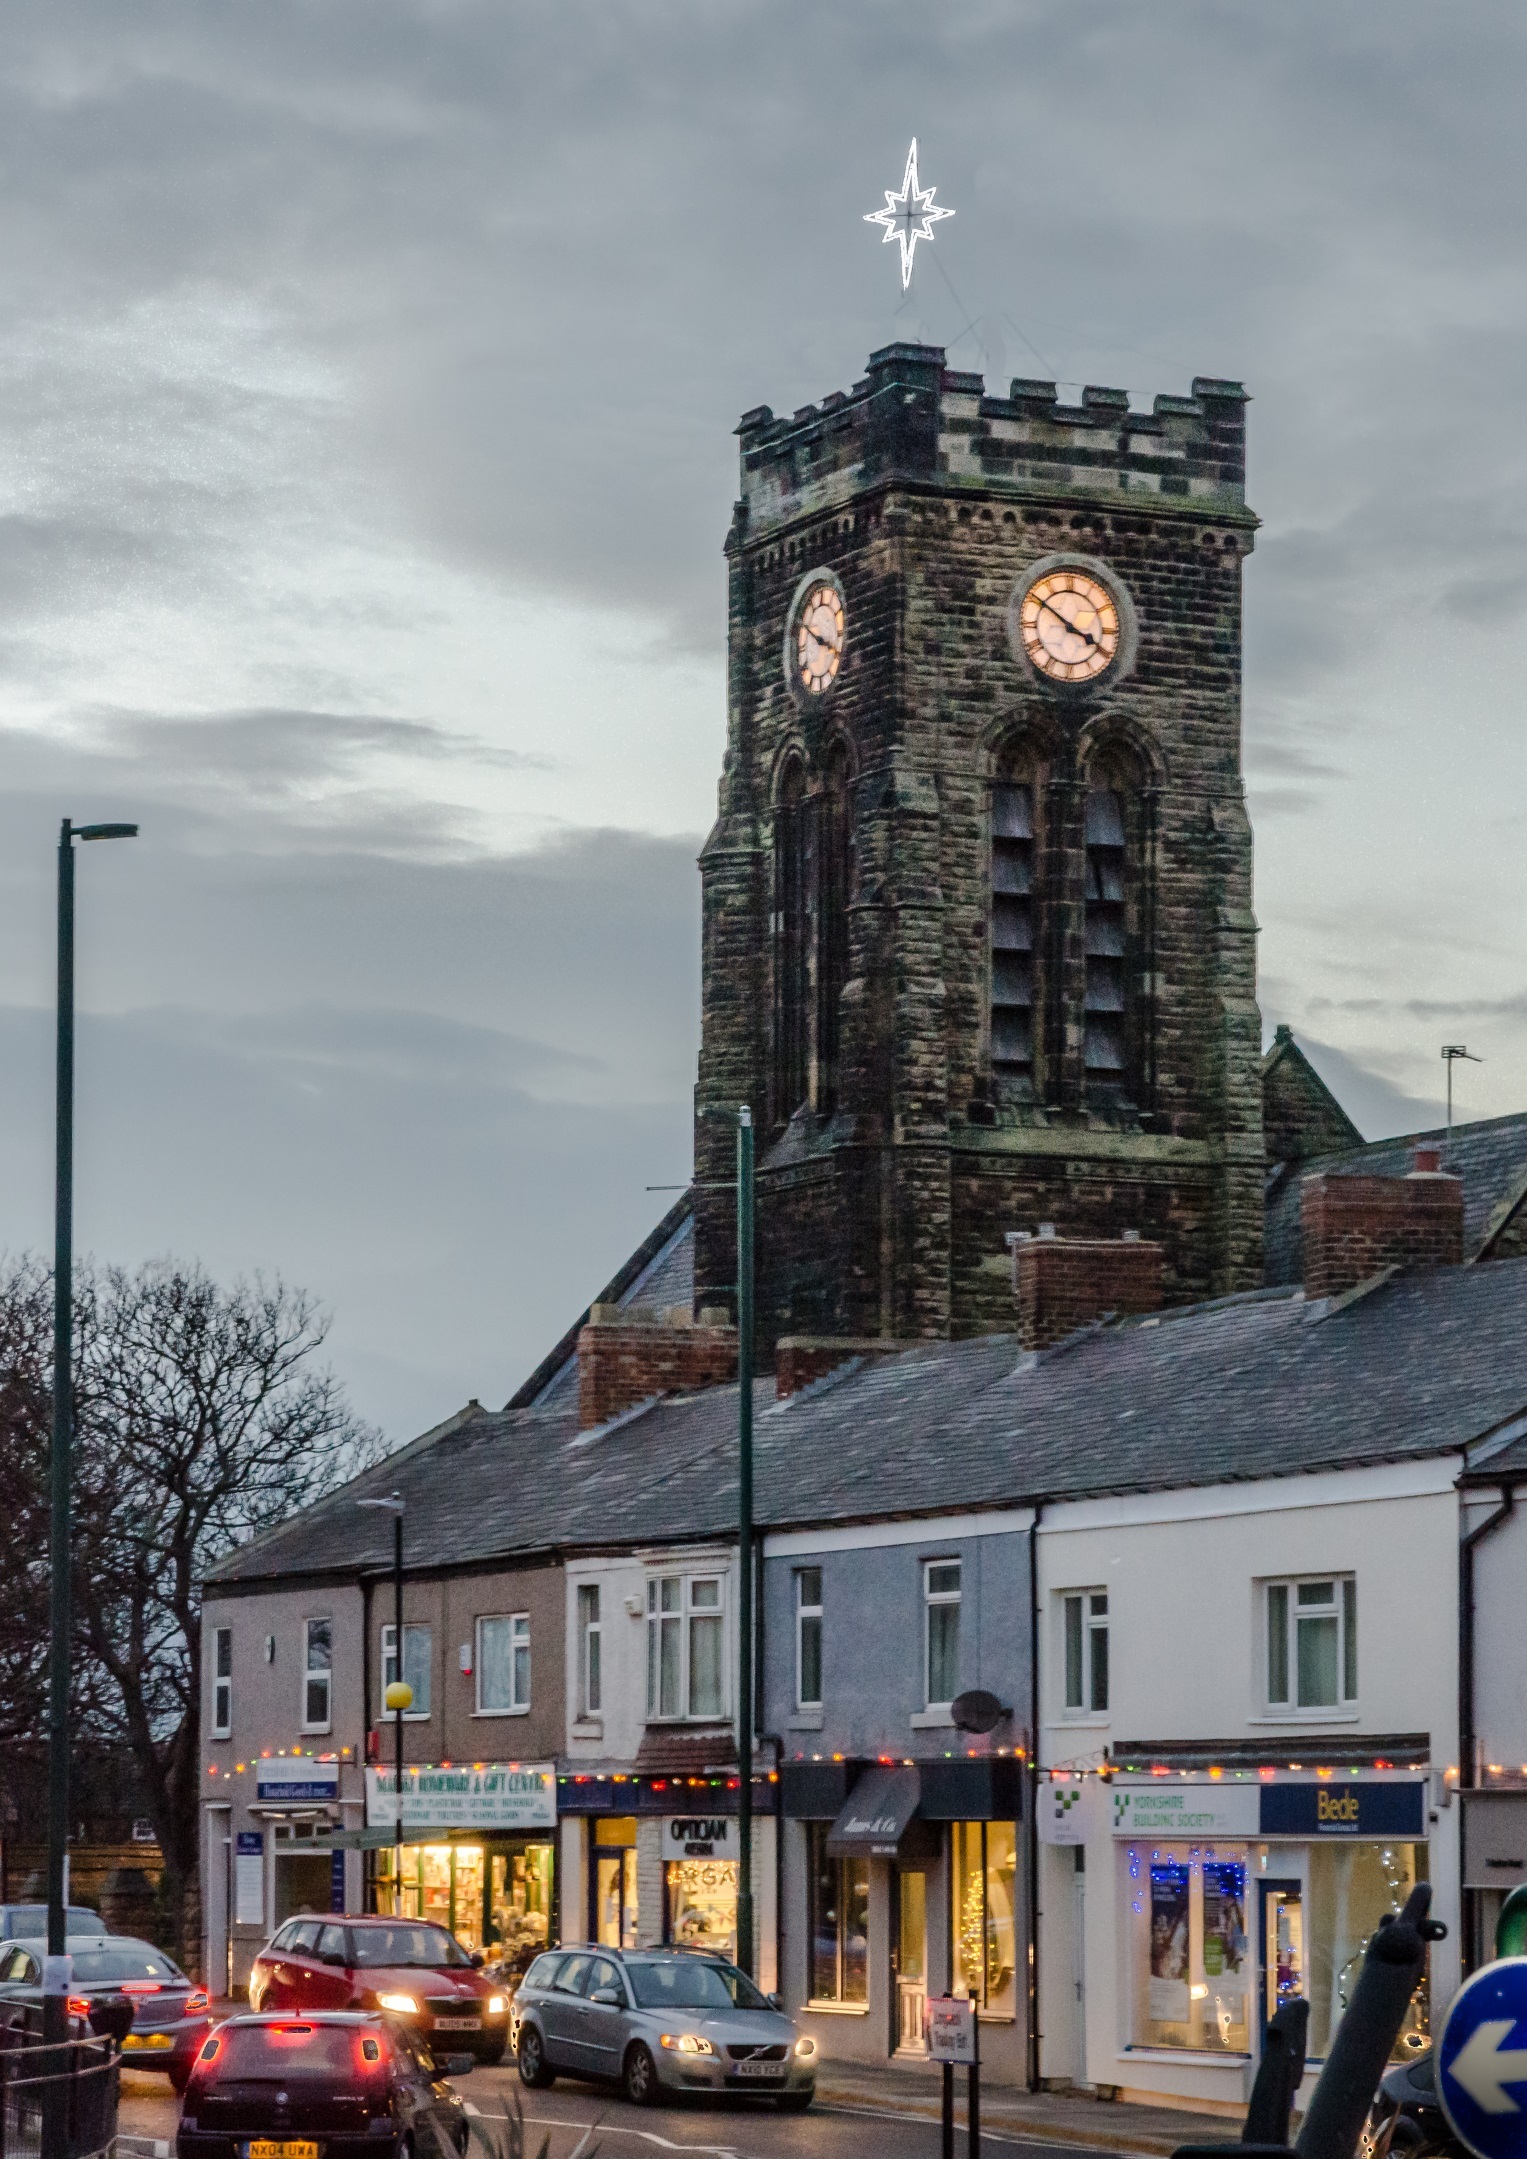 The illuminated star on the tower of St Marks Church, photographed by Peter Downham, of Marske-by-the-Sea. The tower caught fire during an Easter Day service 120 years ago